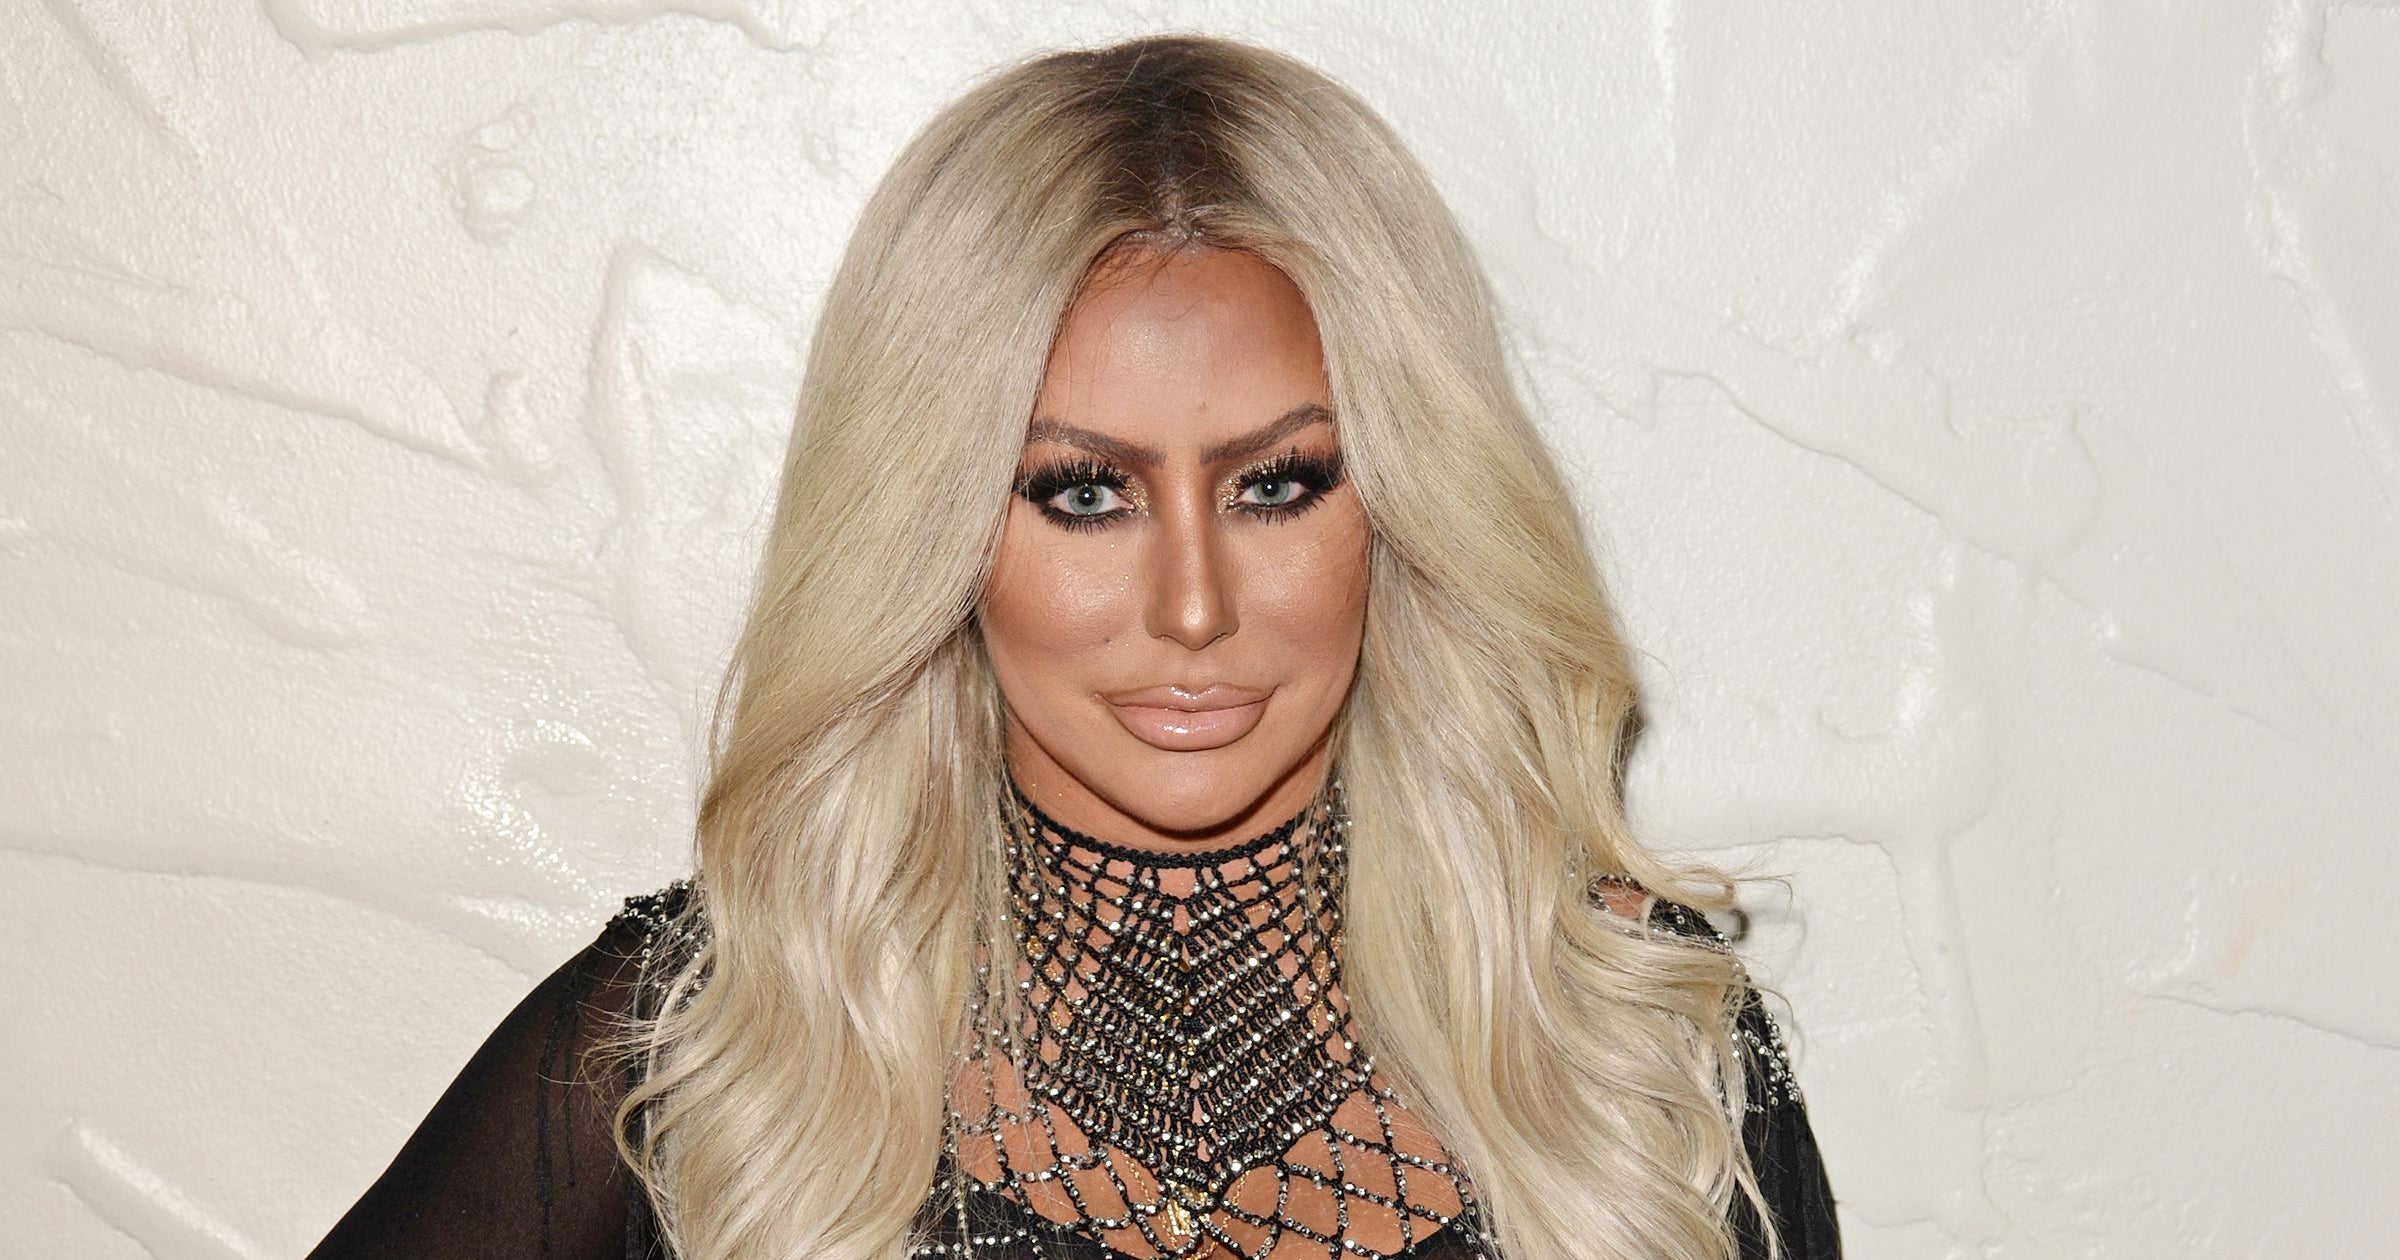 Aubrey O'Day has entered the chat. 